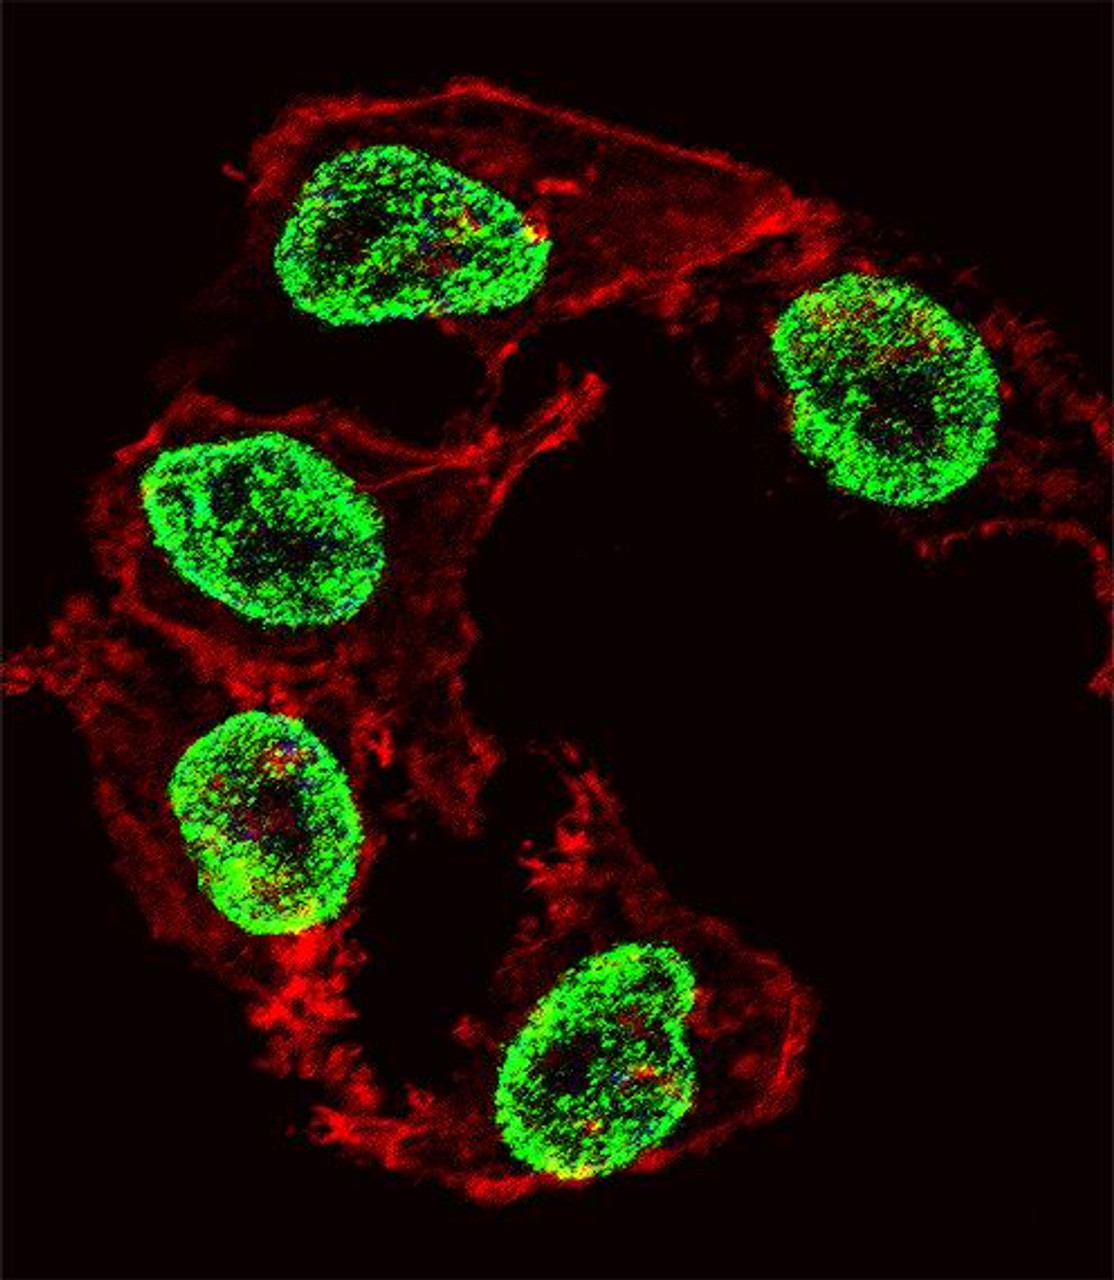 Fluorescent confocal image of HepG2 cell stained with ARGFX Antibody .HepG2 cells were fixed with 4% PFA (20 min) , permeabilized with Triton X-100 (0.1%, 10 min) , then incubated with ARGFX primary antibody (1:25) . For secondary antibody, Alexa Fluor 488 conjugated donkey anti-rabbit antibody (green) was used (1:400) .Cytoplasmic actin was counterstained with Alexa Fluor 555 (red) conjugated Phalloidin (7units/ml) . Nuclei were counterstained with DAPI (blue) (10 ug/ml, 10 min) . ARGFX immunoreactivity is localized to Nucleus significantly.